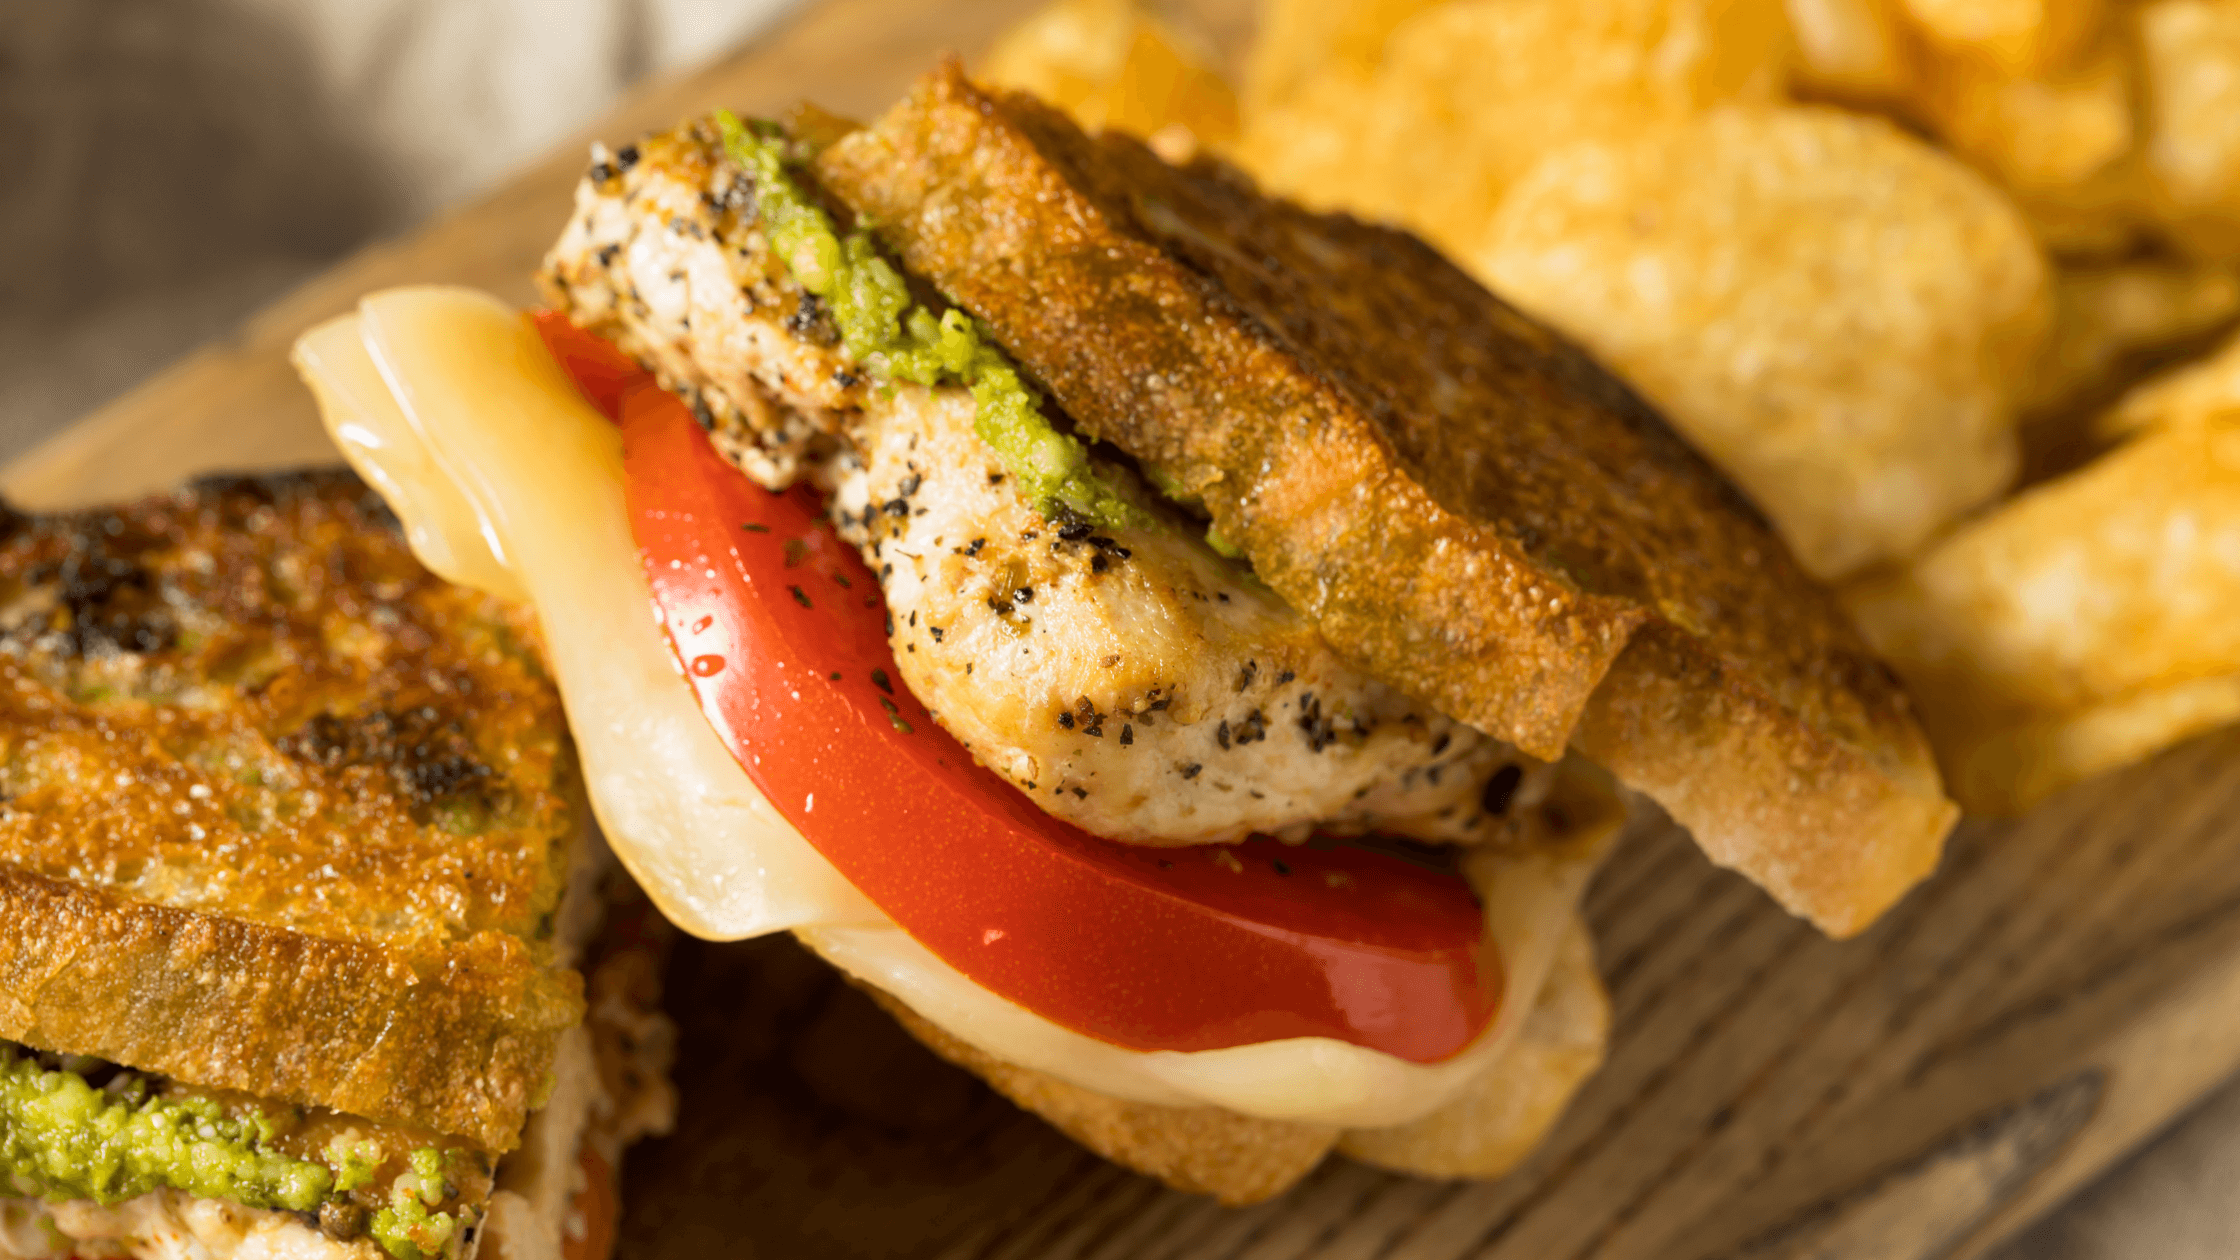 Ultimate Savory Chicken Pesto Sandwich Delight: A Gourmet Experience 6